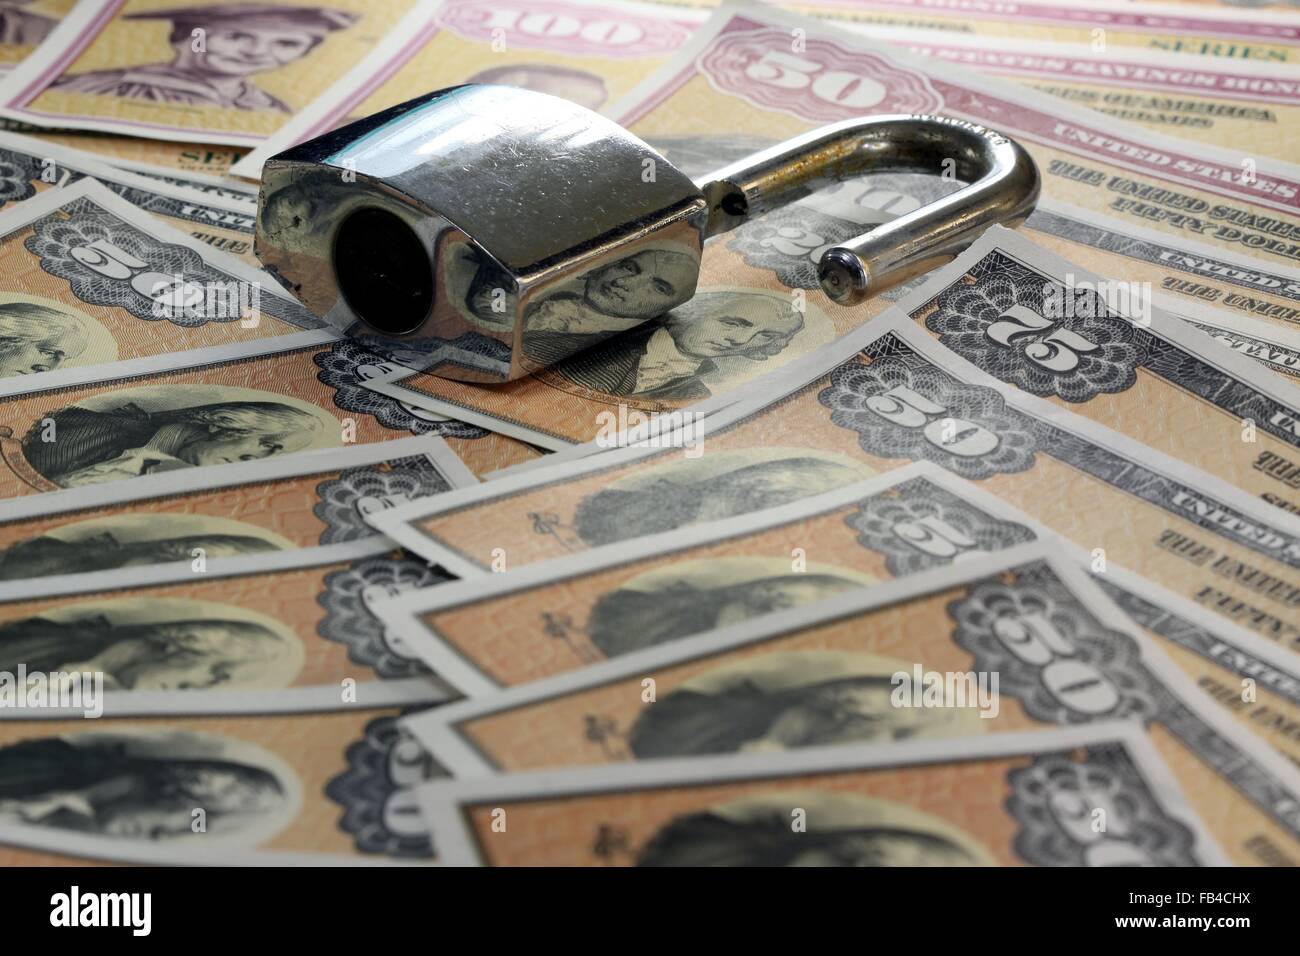 United States Savings Bonds with padlock - Financial security concept Stock Photo